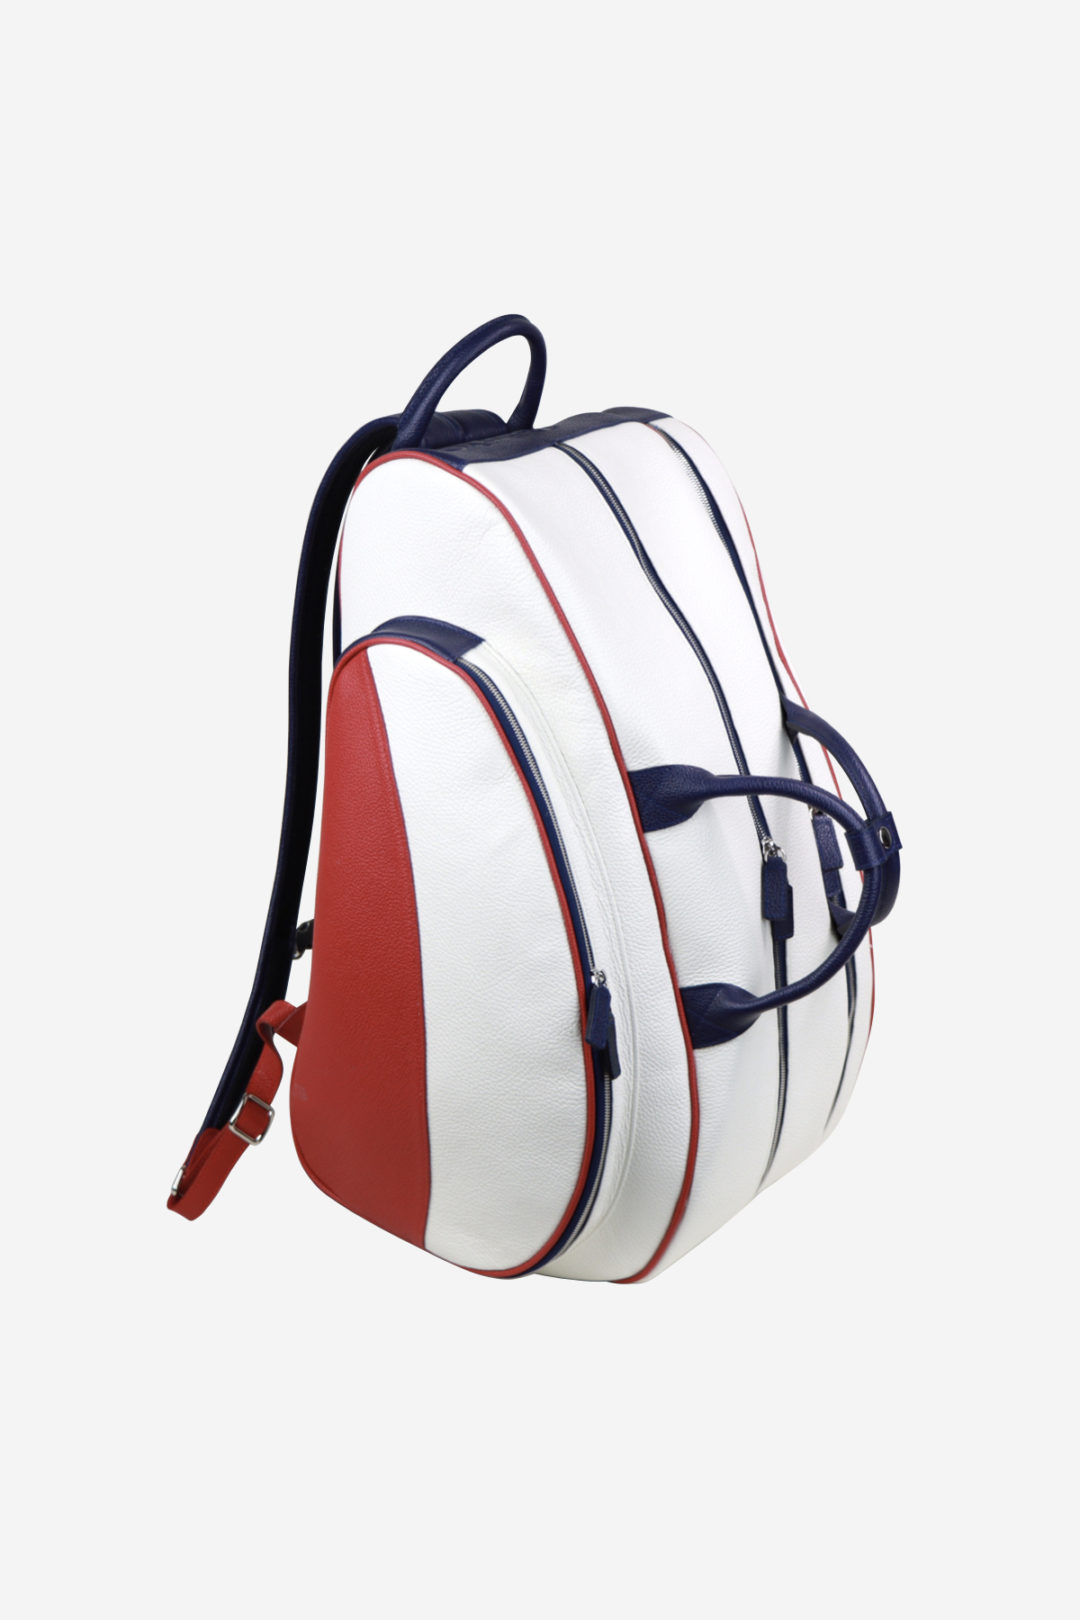 leather sports bags handmade in italy made in italy terrida venice padel bag leather tennis bag stile italiano customized bag borse personalizzate iniziali padel backpack leather padel bag